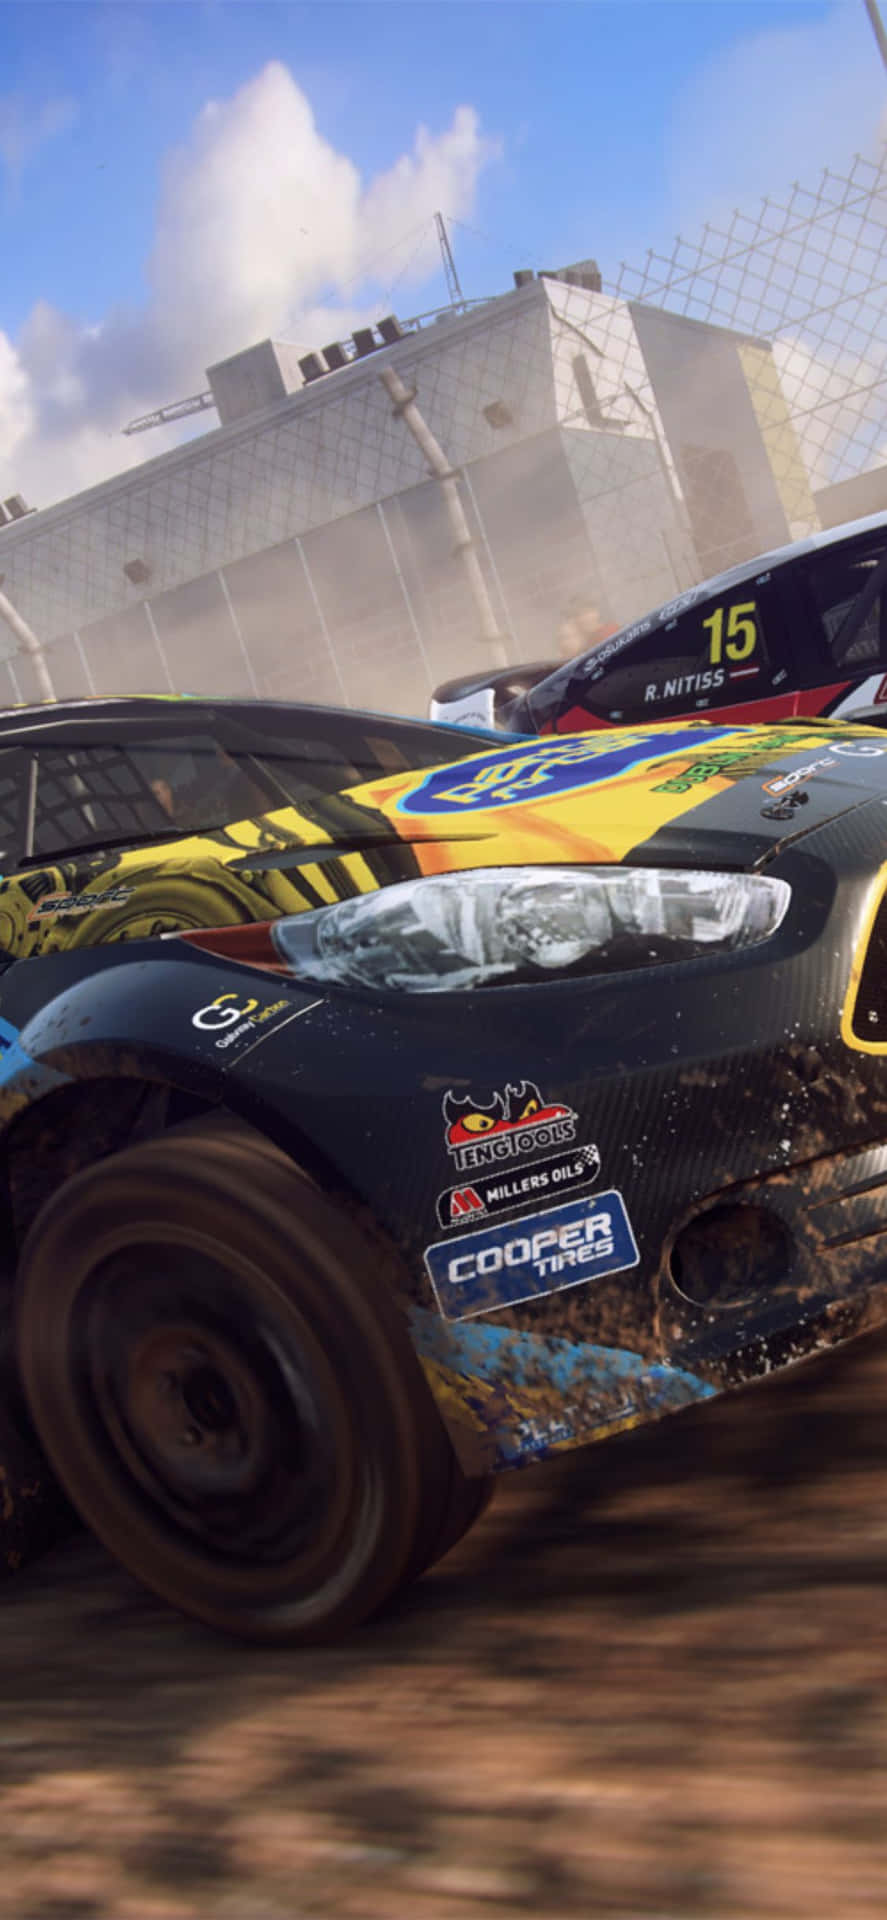 Conquer the dirt track on your Iphone X